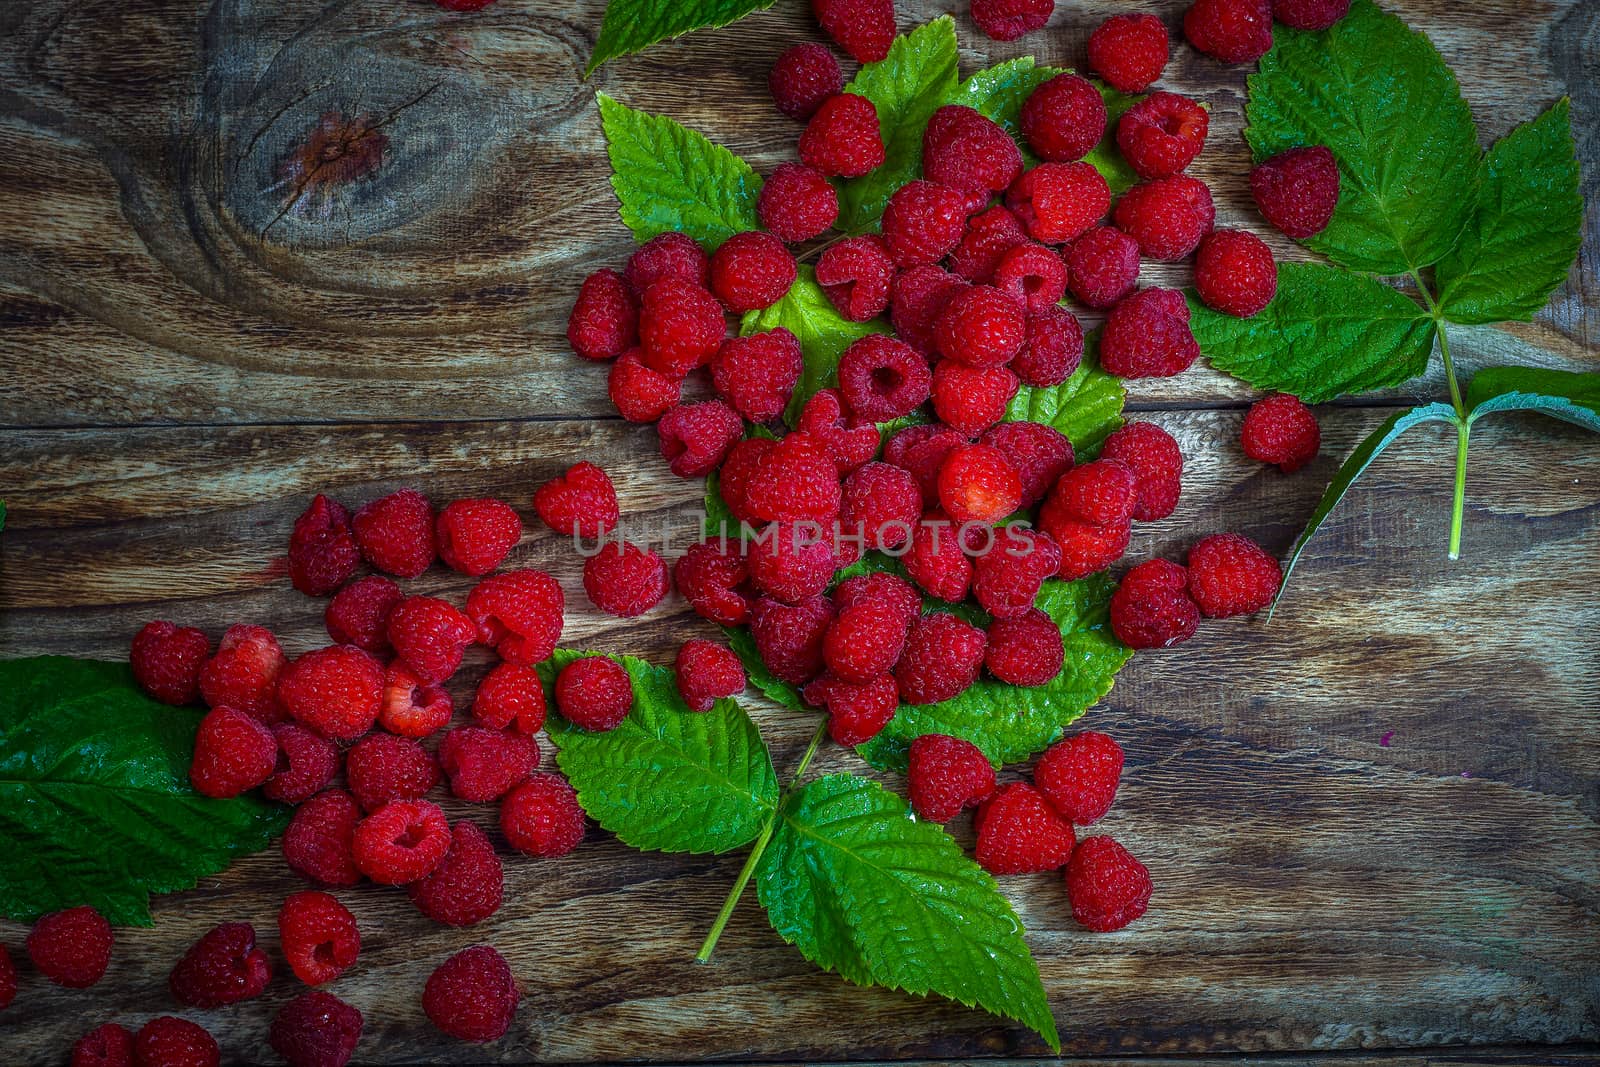 Fresh raspberries background close-up photo. Fresh raspberries on a rustic wooden table. Selective focus.